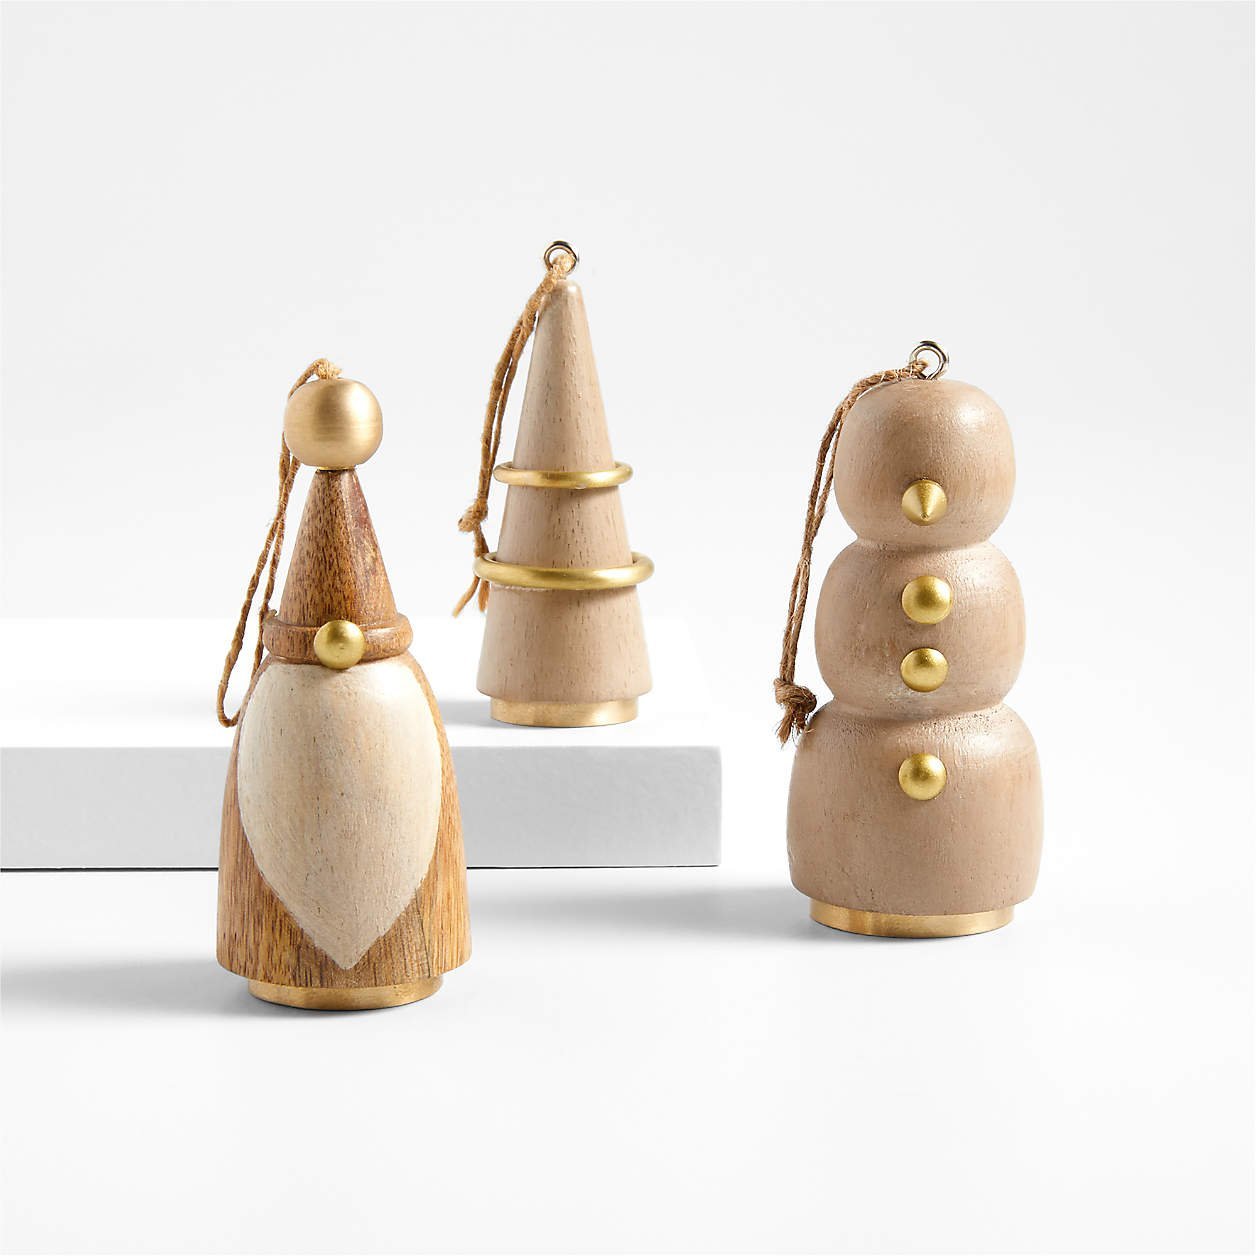 brass-and-wood-christmas-ornaments.jpeg